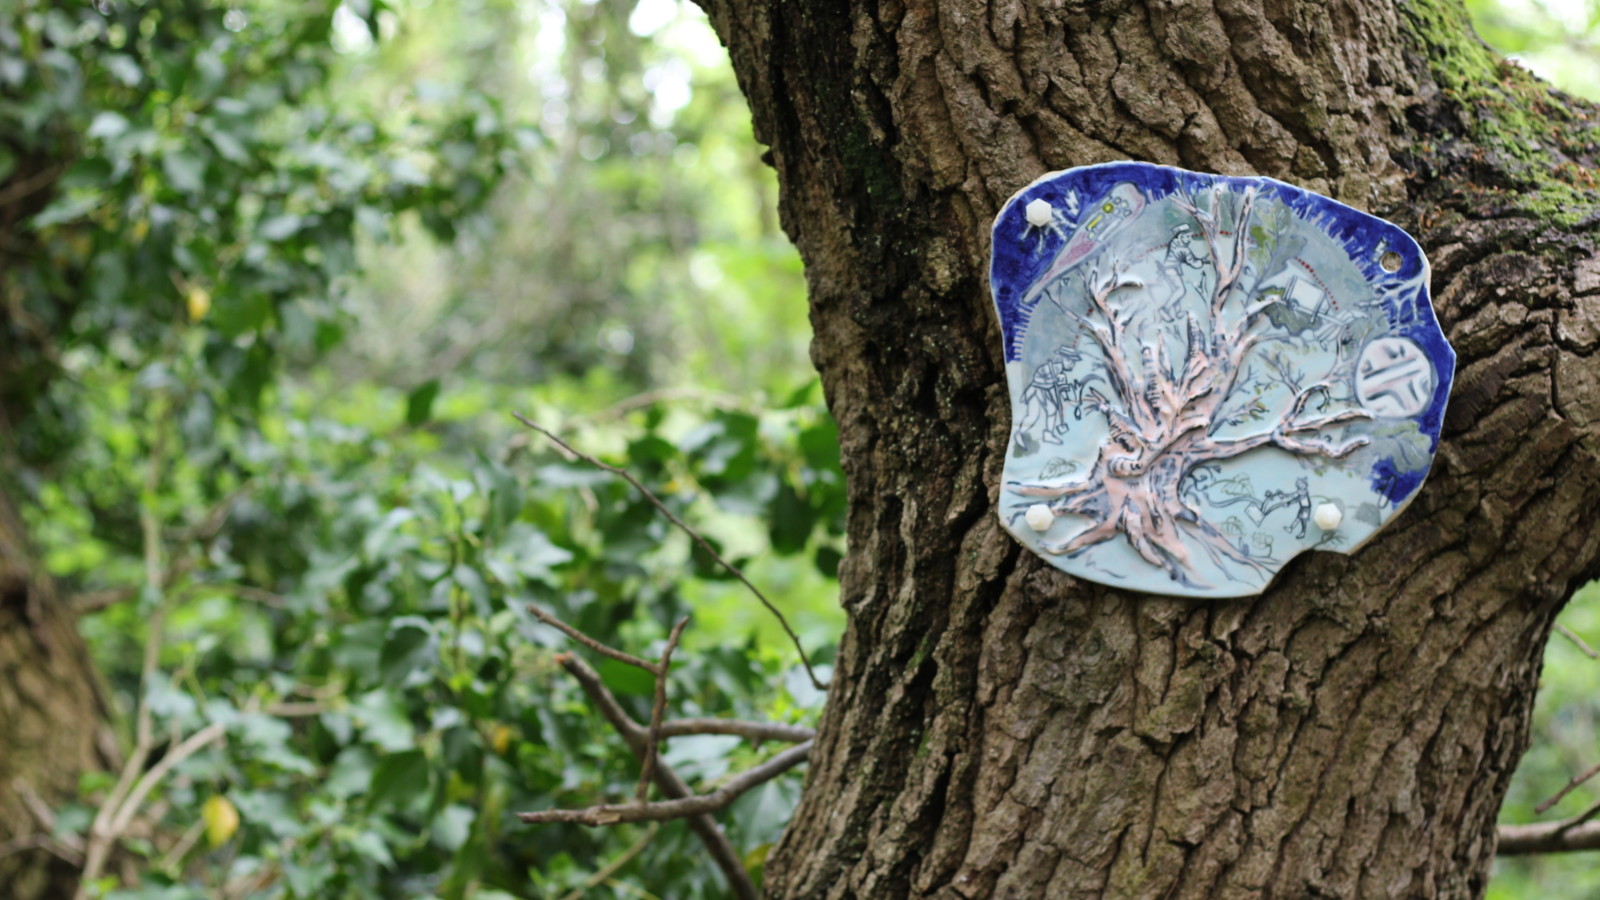 A clay relief featuring a tree is attached to a tree.